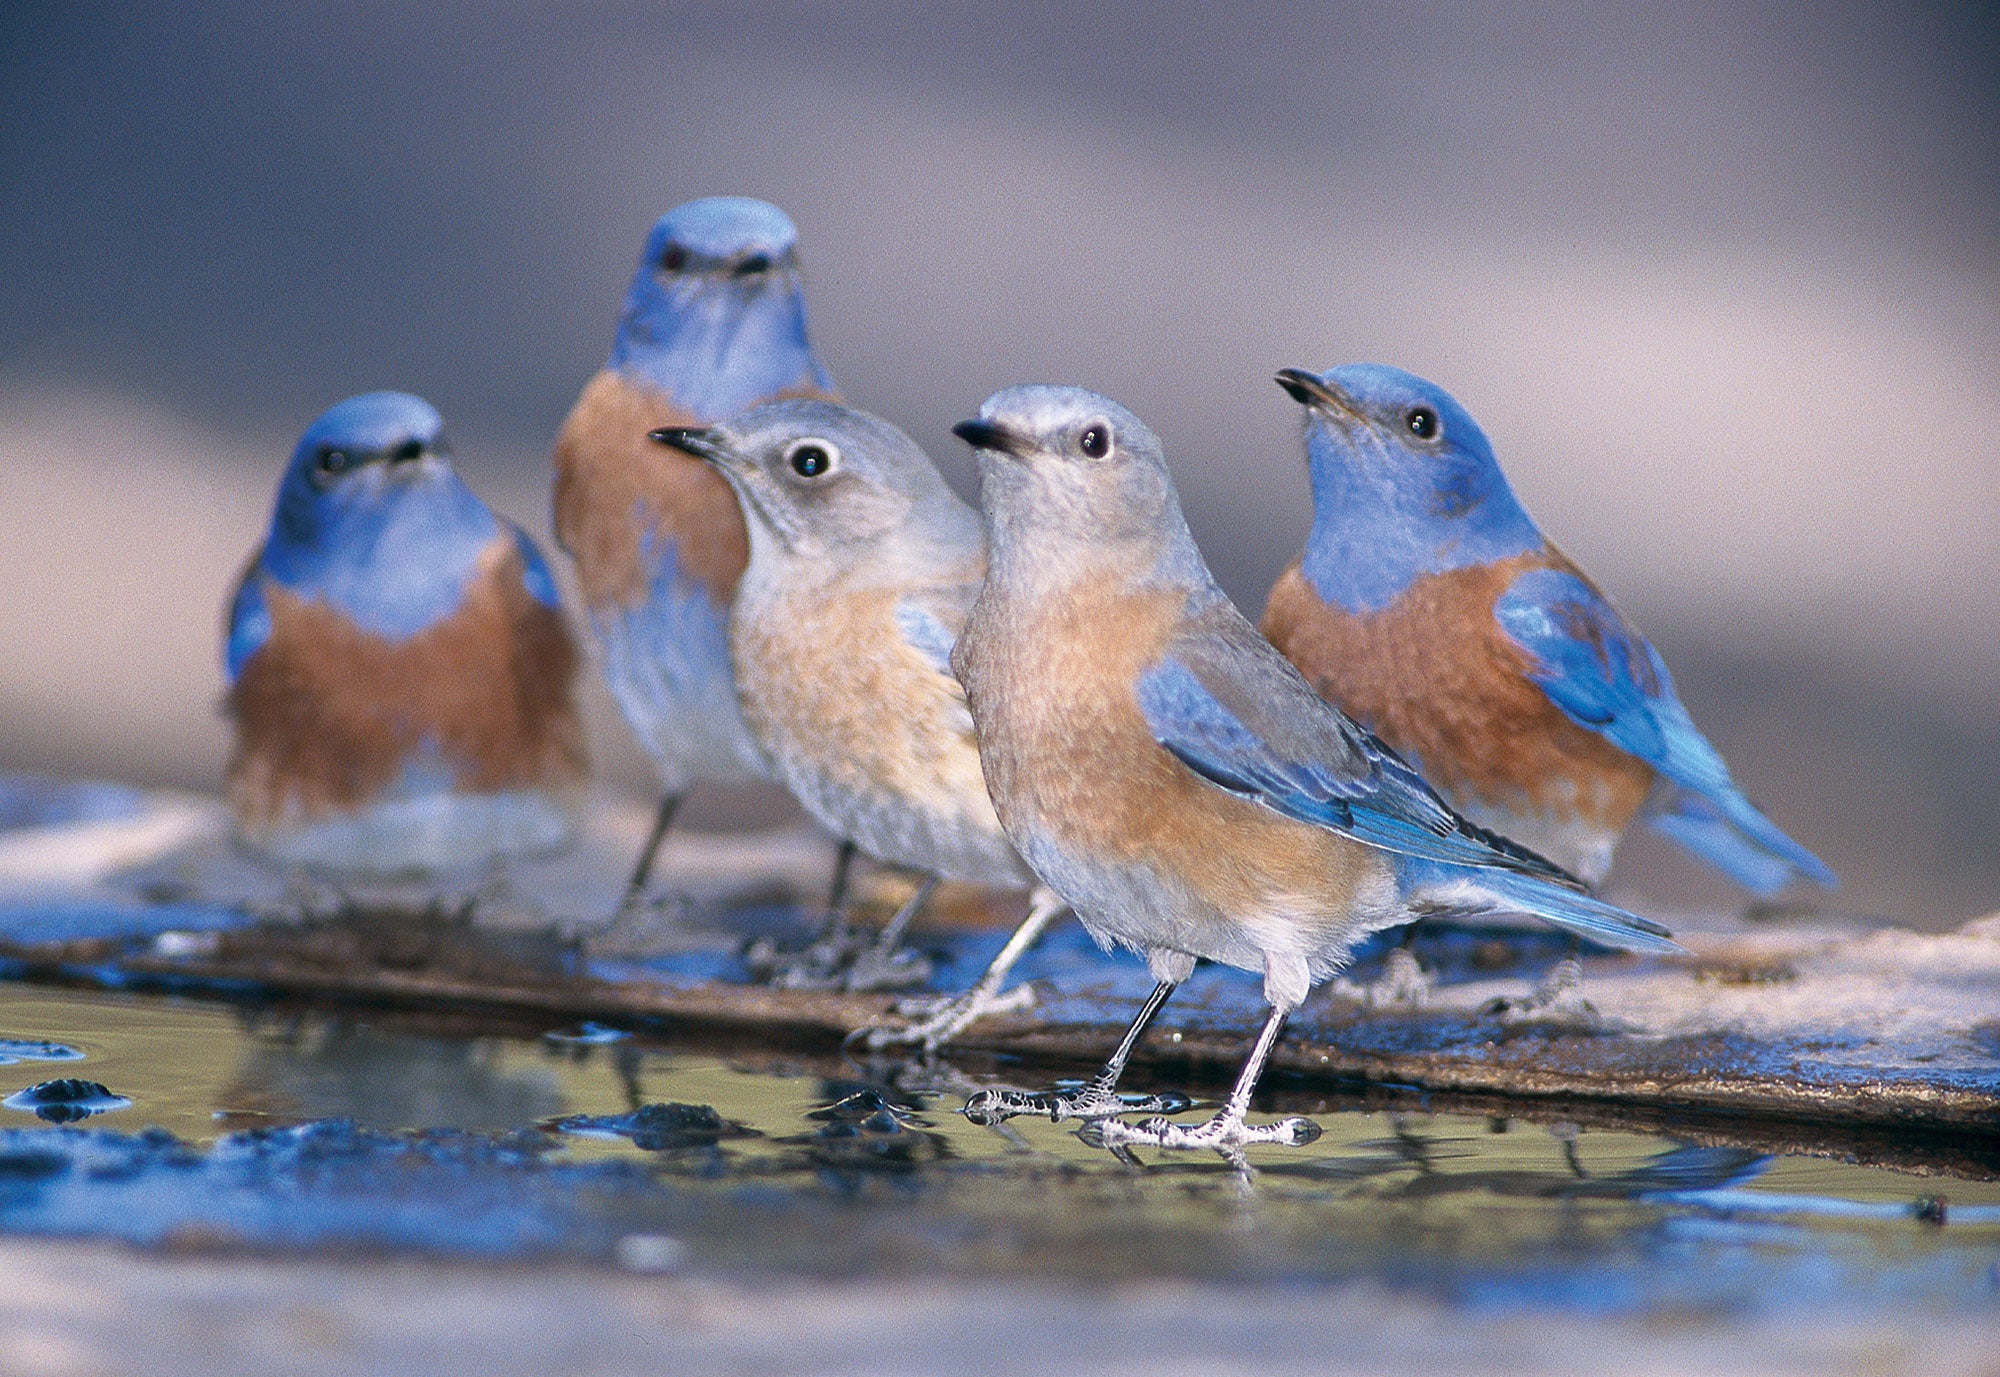 A group of western bluebirds sitting near water. End of image description.